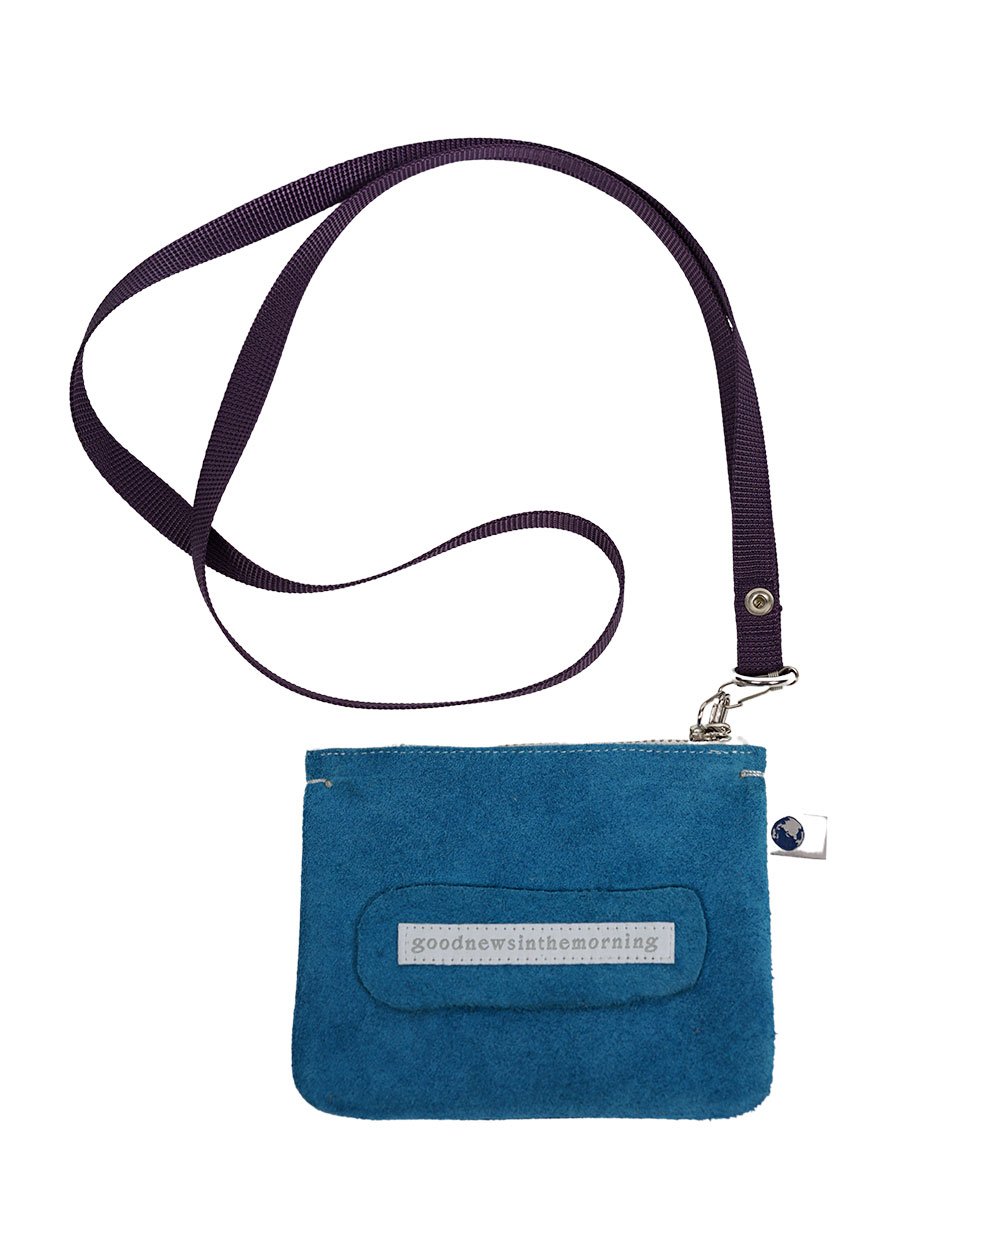 GOOD NEWS LEATHER POUCH (Blue)